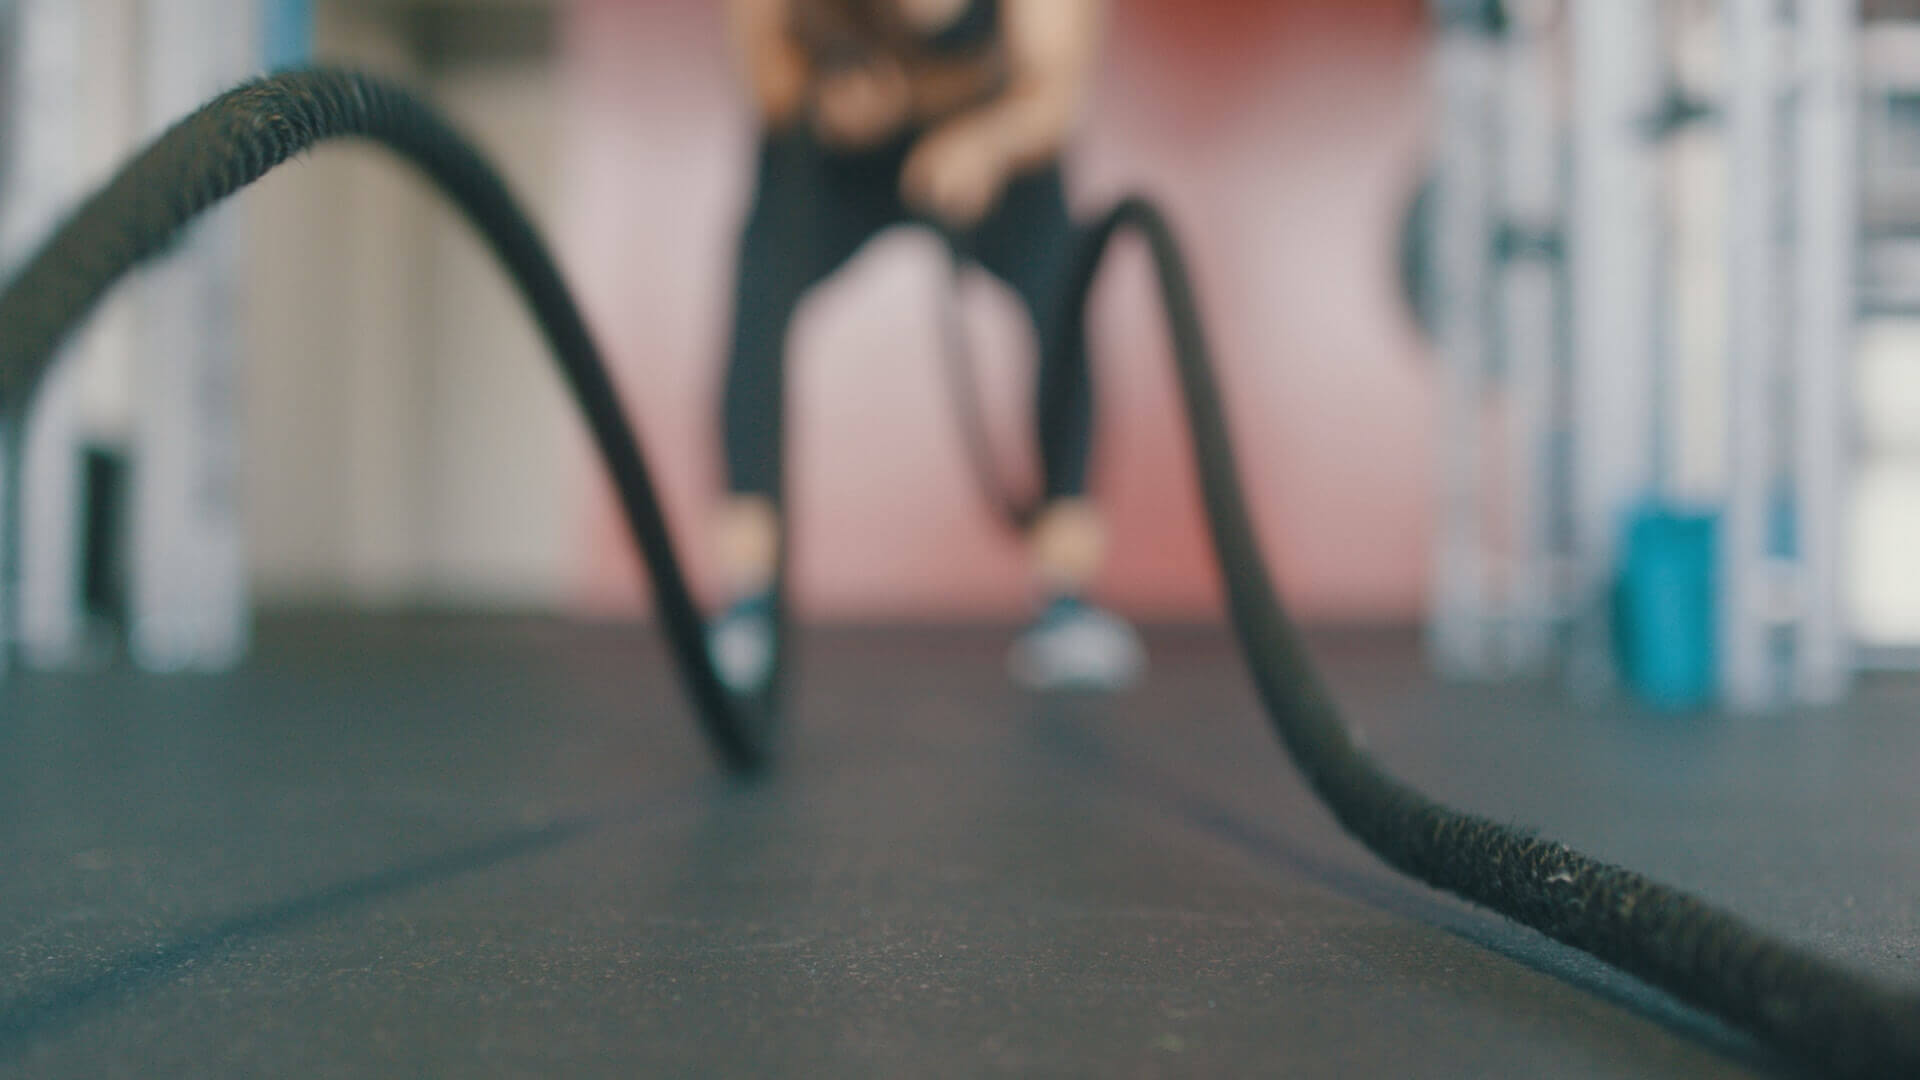 A person engaged in a workout, energetically using ropes for exercise at the gym.